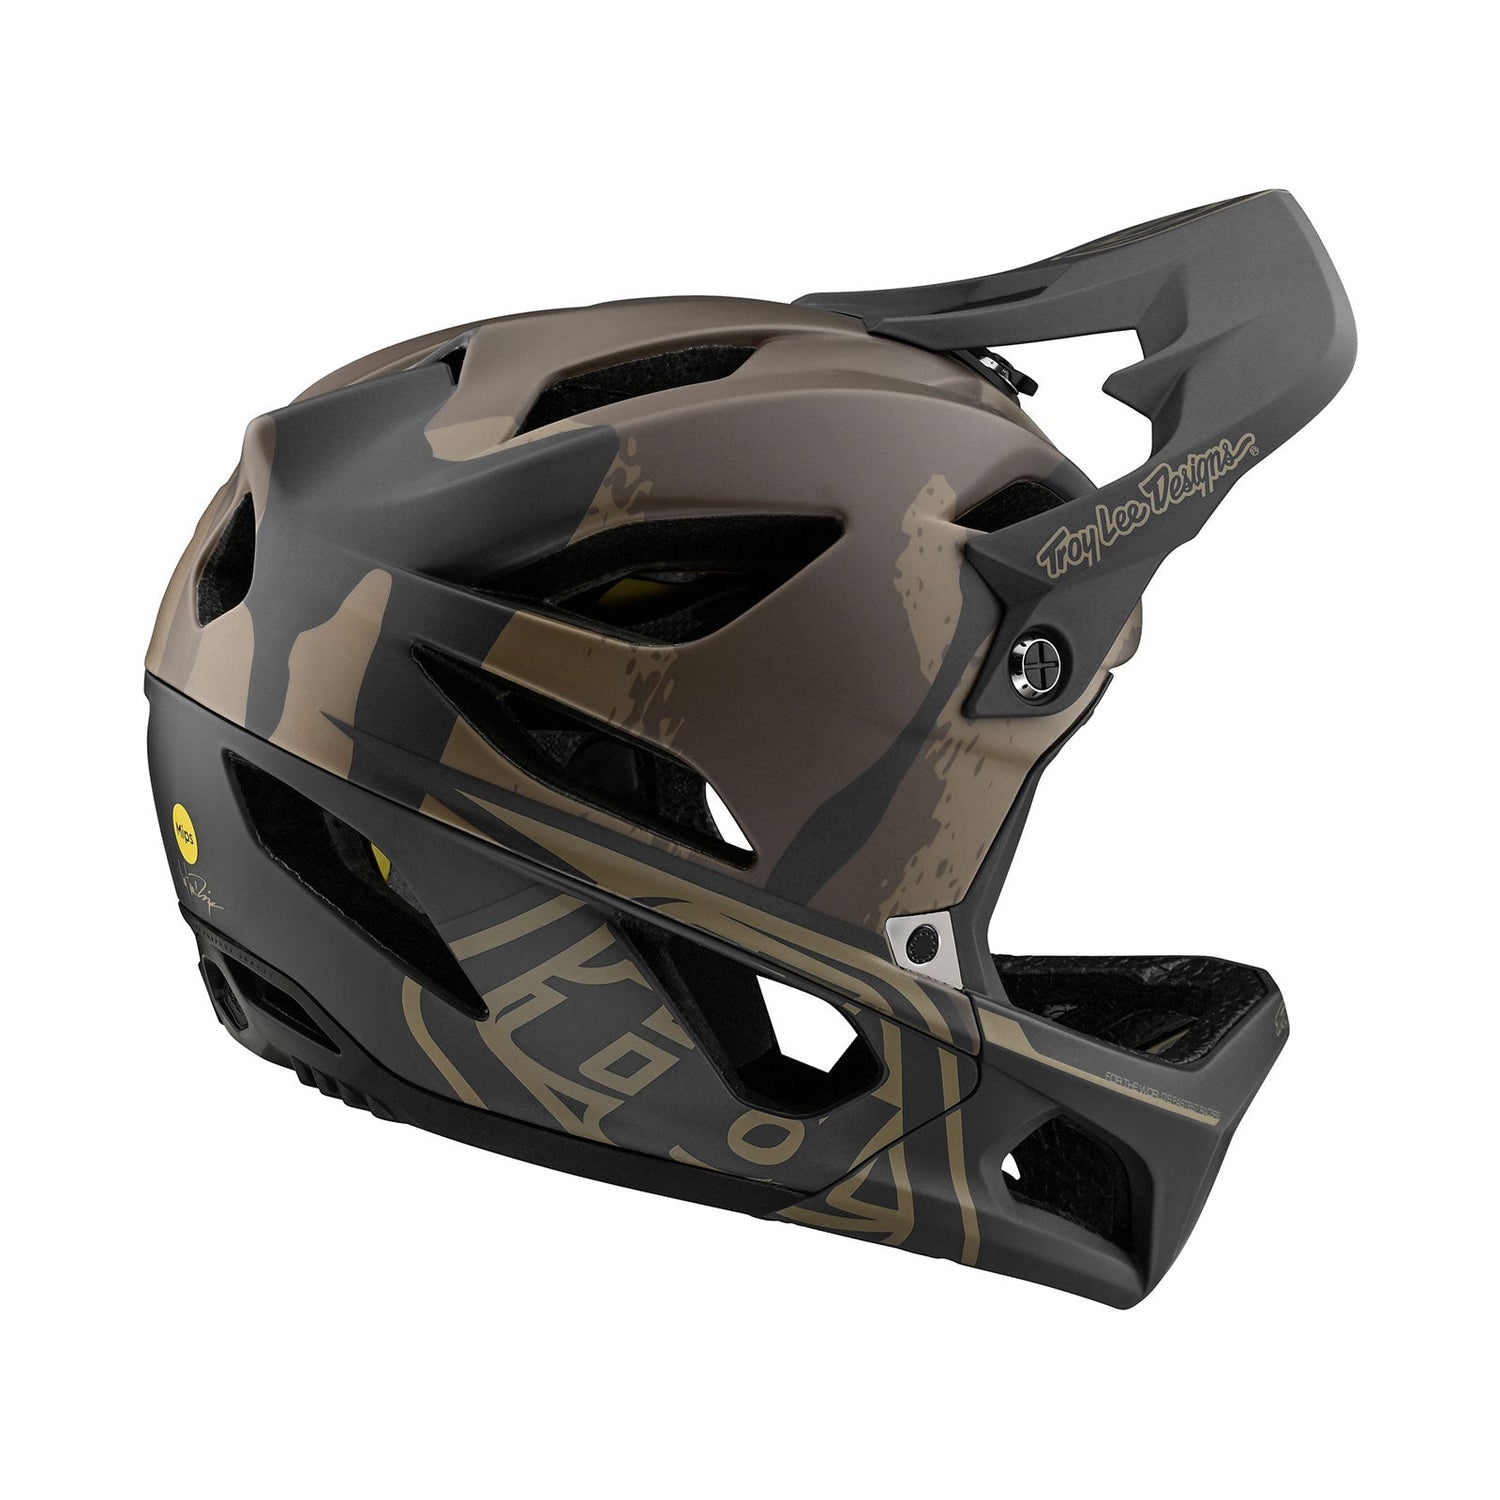 Stage Helmet W/MIPS Stealth Camo Olive